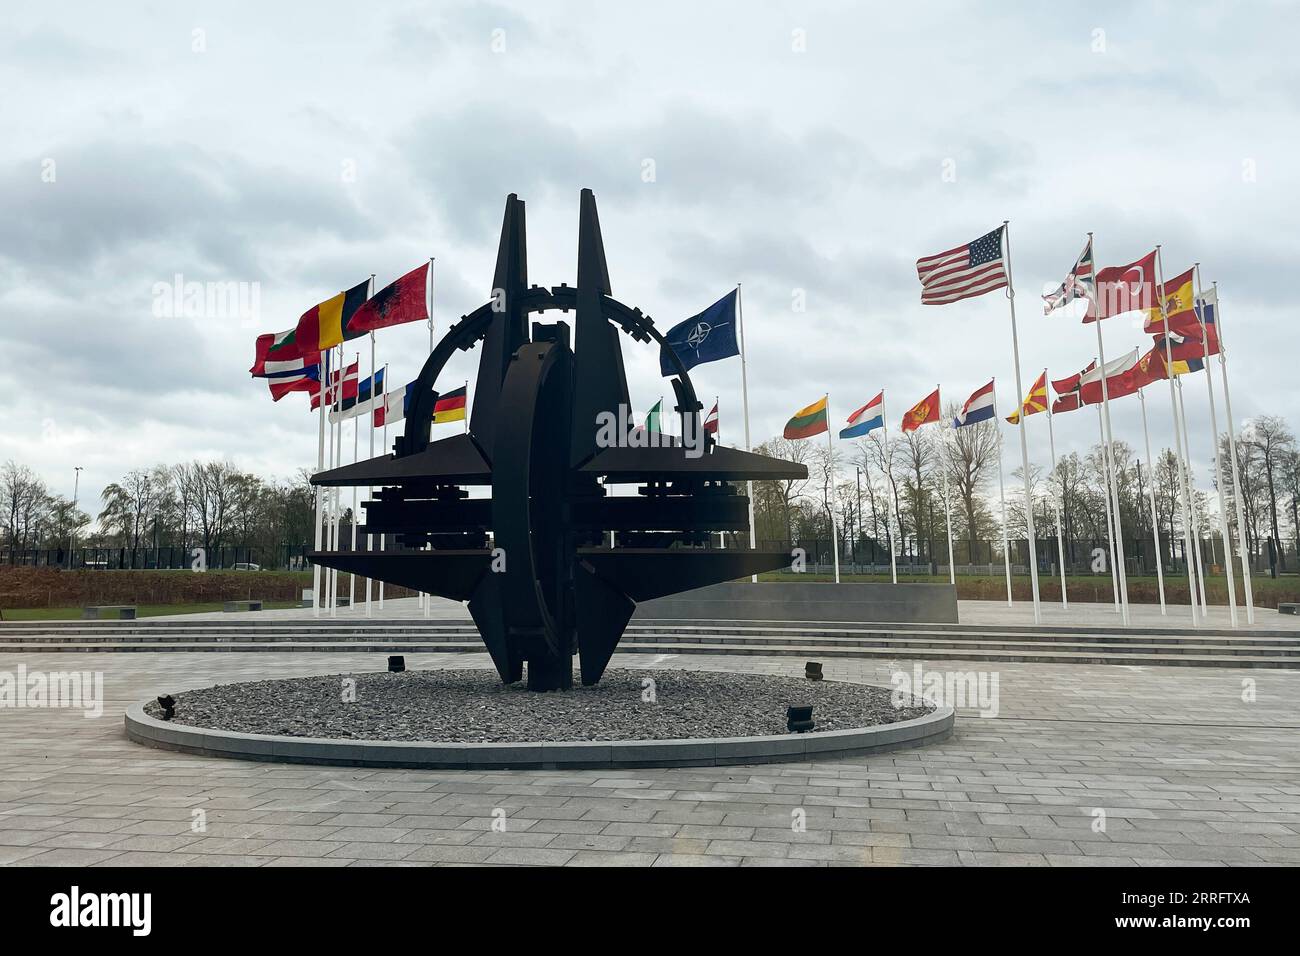 220426 -- BEIJING, April 26, 2022 -- Photo taken on April 6, 2022 shows a sculpture and flags at NATO headquarters in Brussels, Belgium.  Xinhua Headlines: Uncovering untold secrets of NATO -- a monstrous remnant from Cold War days ZhengxHuansong PUBLICATIONxNOTxINxCHN Stock Photo